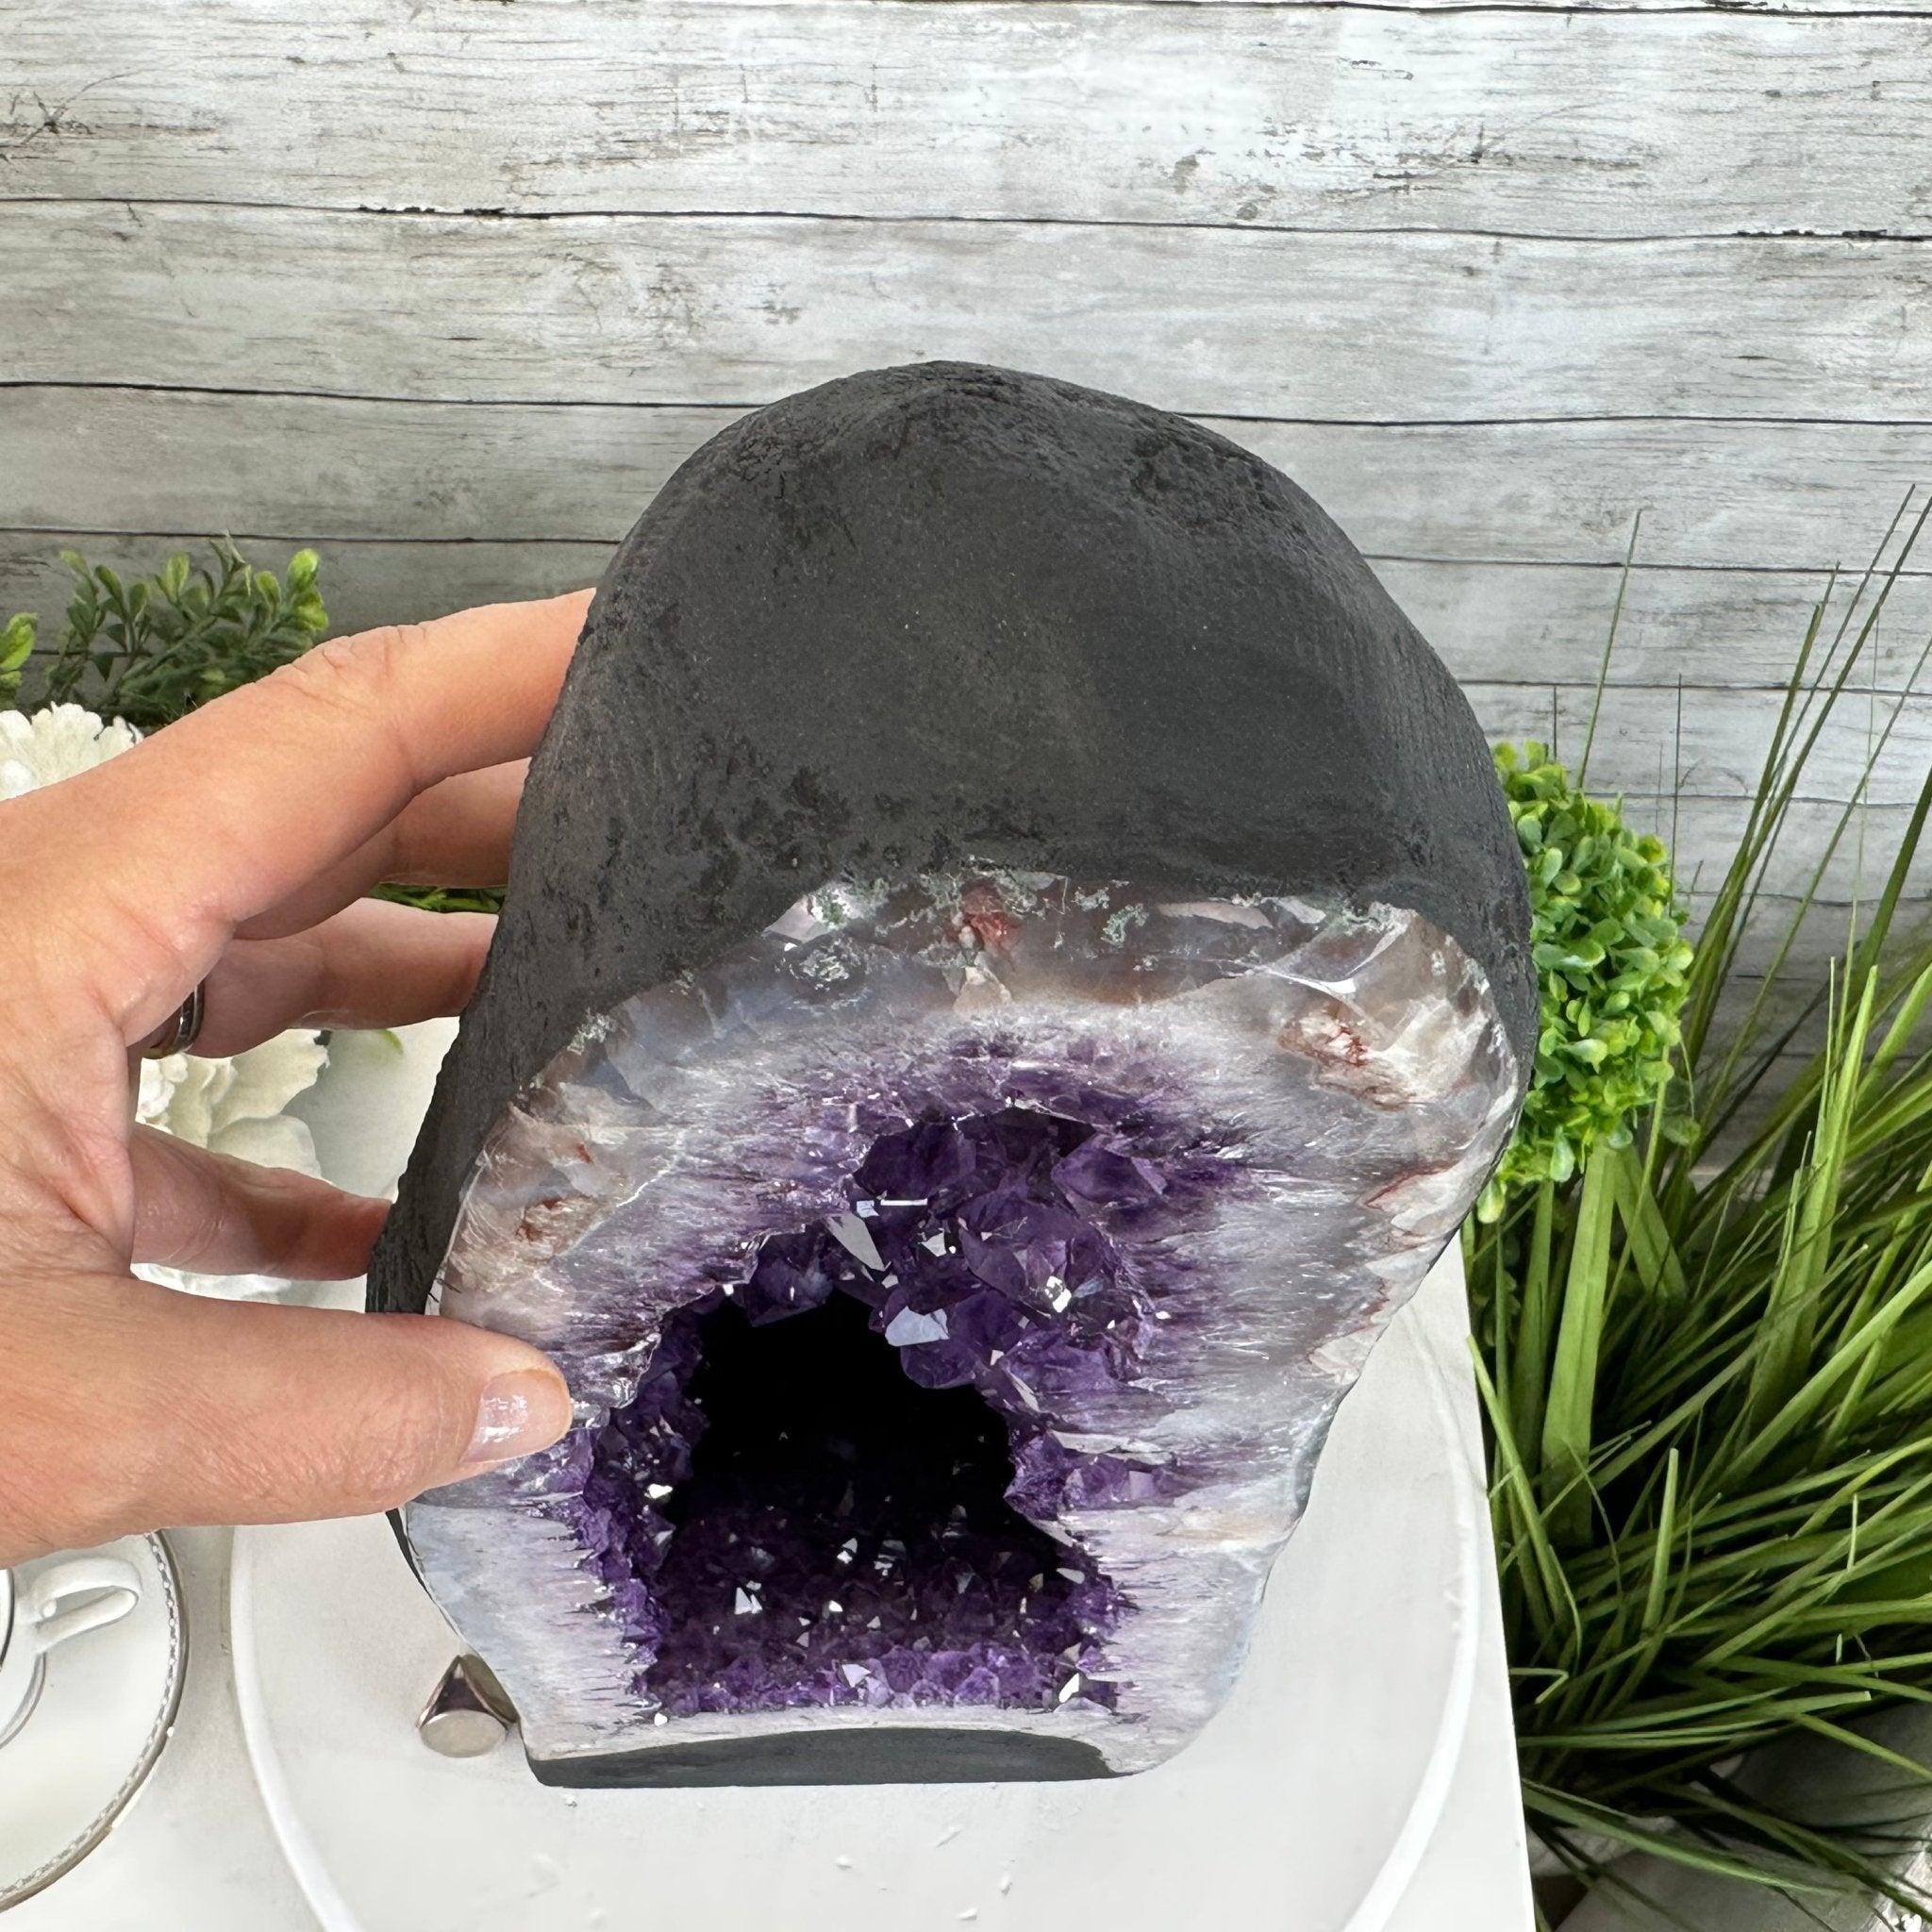 Extra Plus Quality Brazilian Amethyst Cathedral, 40.1 lbs & 20.6" Tall Model #5601-0848 by Brazil Gems - Brazil GemsBrazil GemsExtra Plus Quality Brazilian Amethyst Cathedral, 40.1 lbs & 20.6" Tall Model #5601-0848 by Brazil GemsCathedrals5601-0848